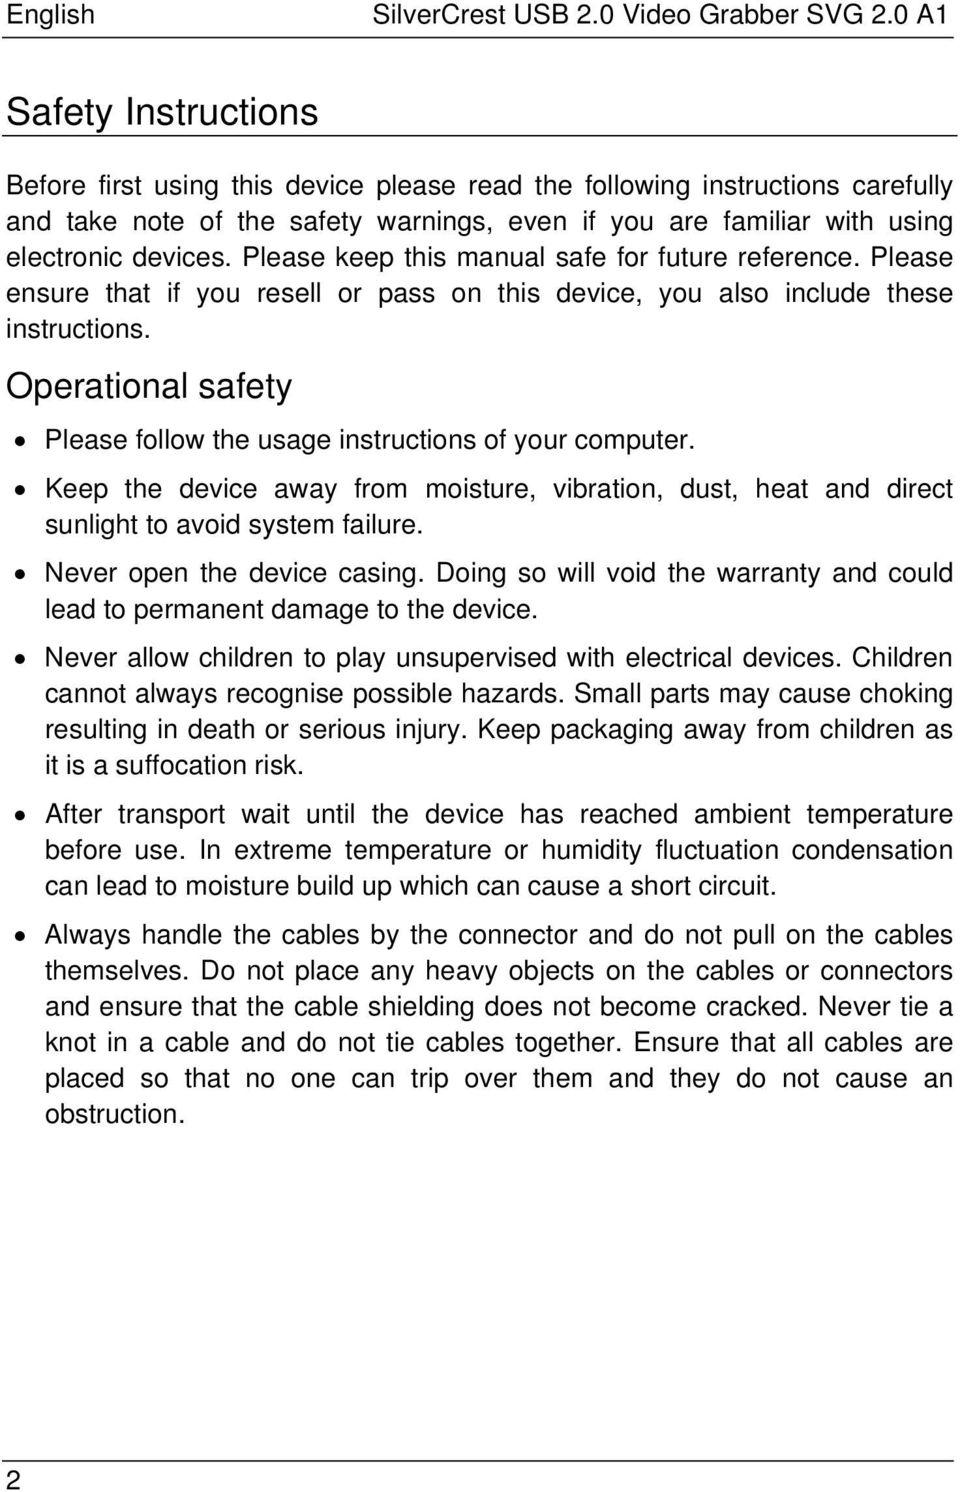 Please keep this manual safe for future reference. Please ensure that if you resell or pass on this device, you also include these instructions.